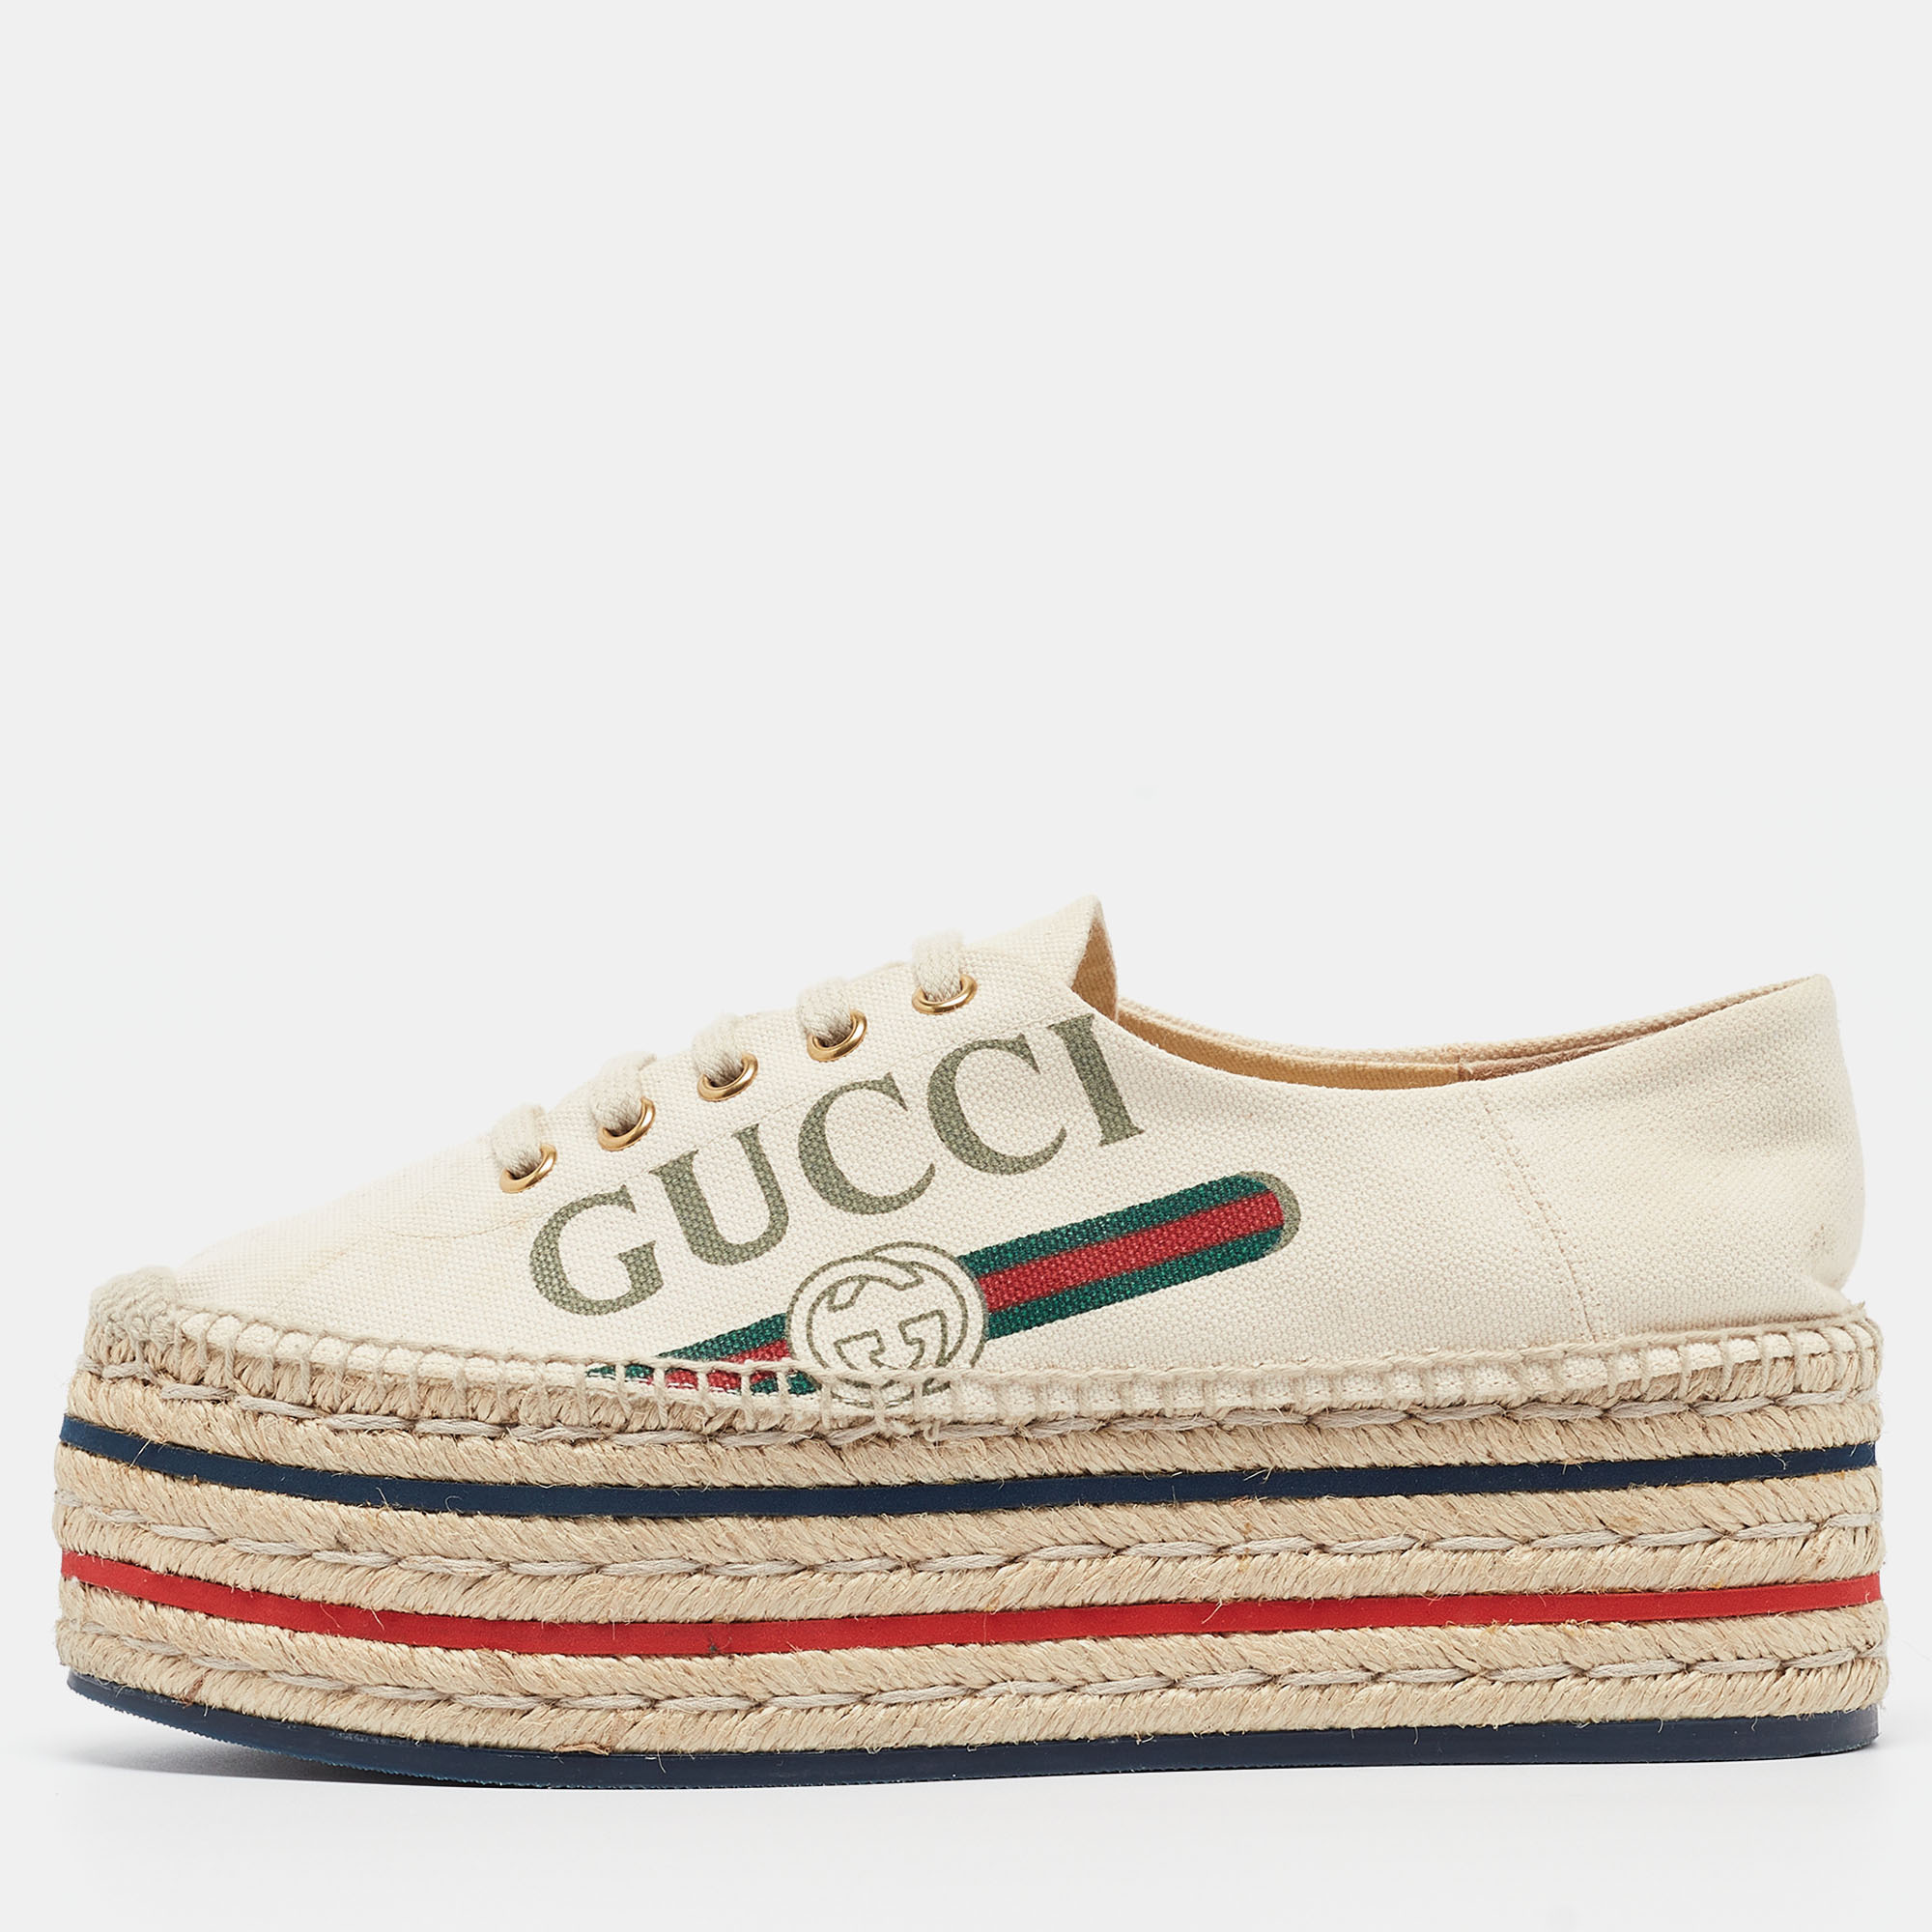 Step out in style with these chic espadrilles from Gucci These cream platform shoes are crafted from canvas and feature round toes brand detailing lace ups and espadrille platforms that offer an elevated walk. This is one pair you definitely need to get your hands on